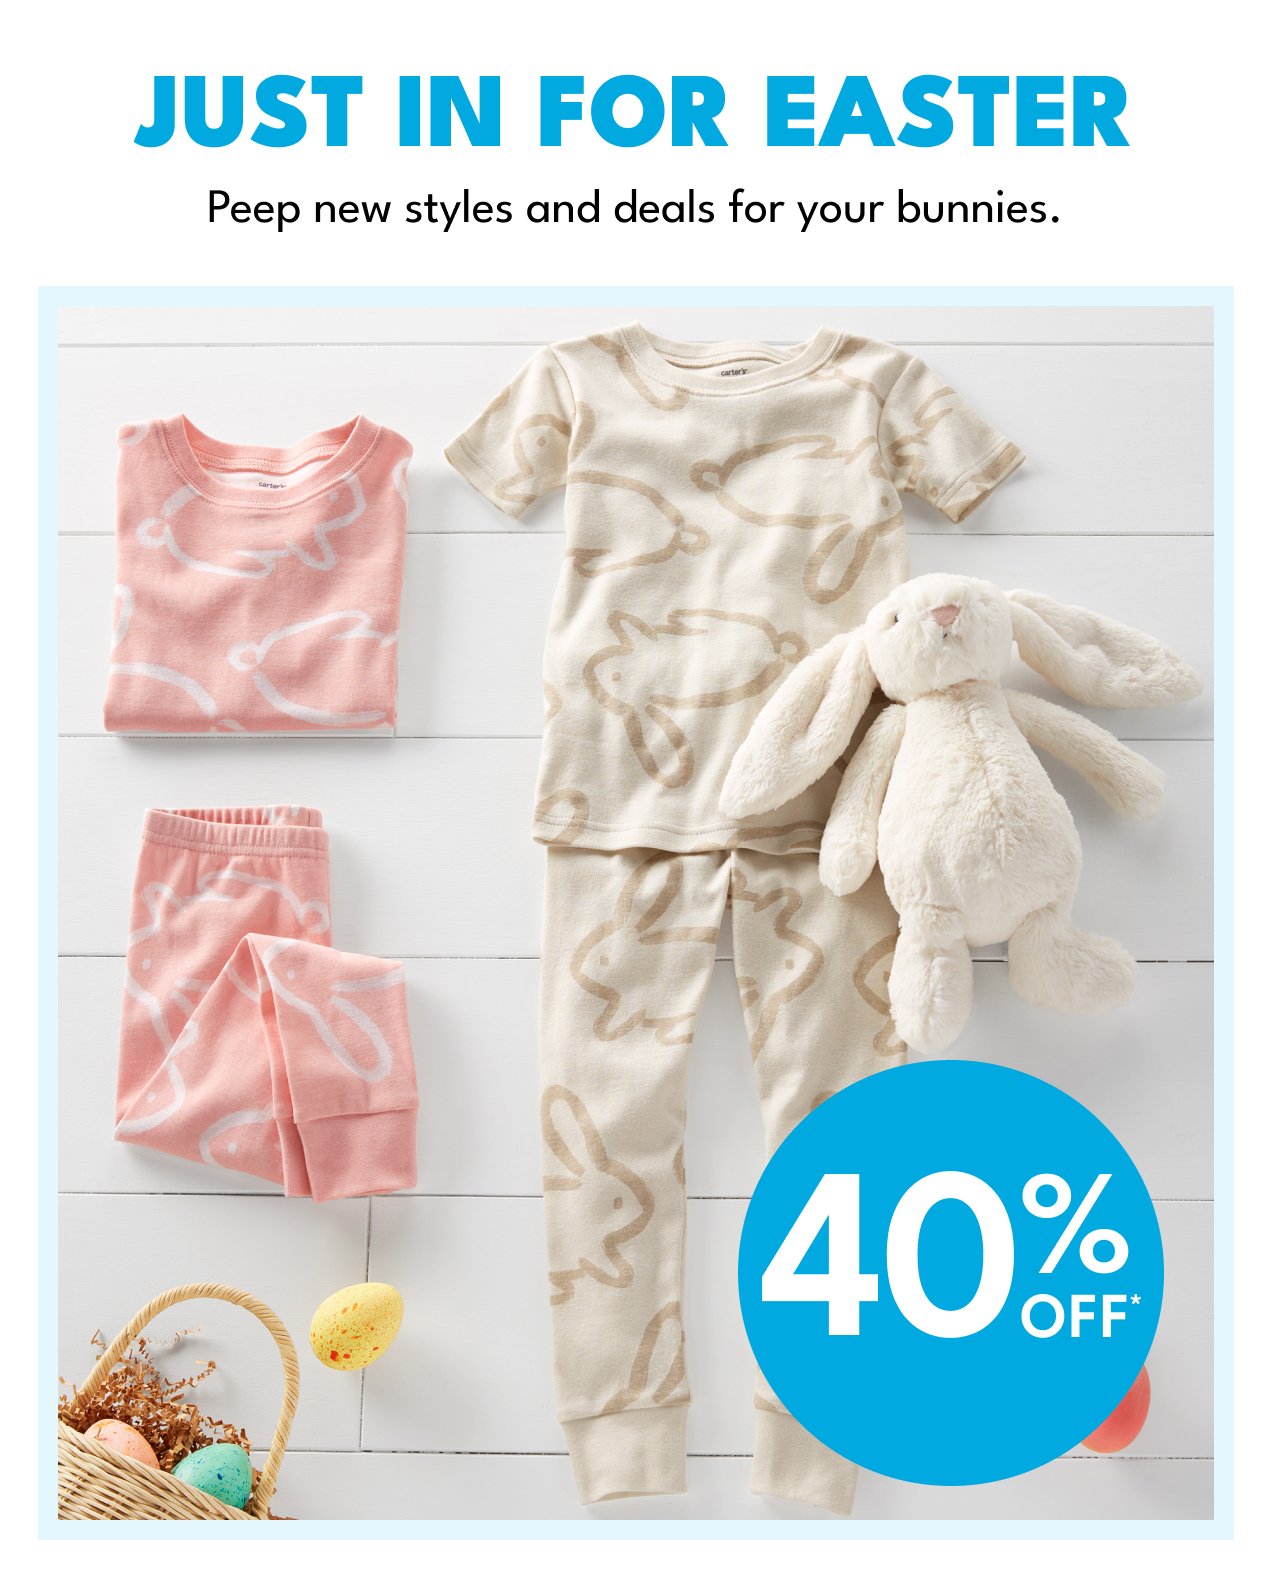 JUST IN FOR EASTER | Peep new styles and deals for your bunnies. | 40% OFF*